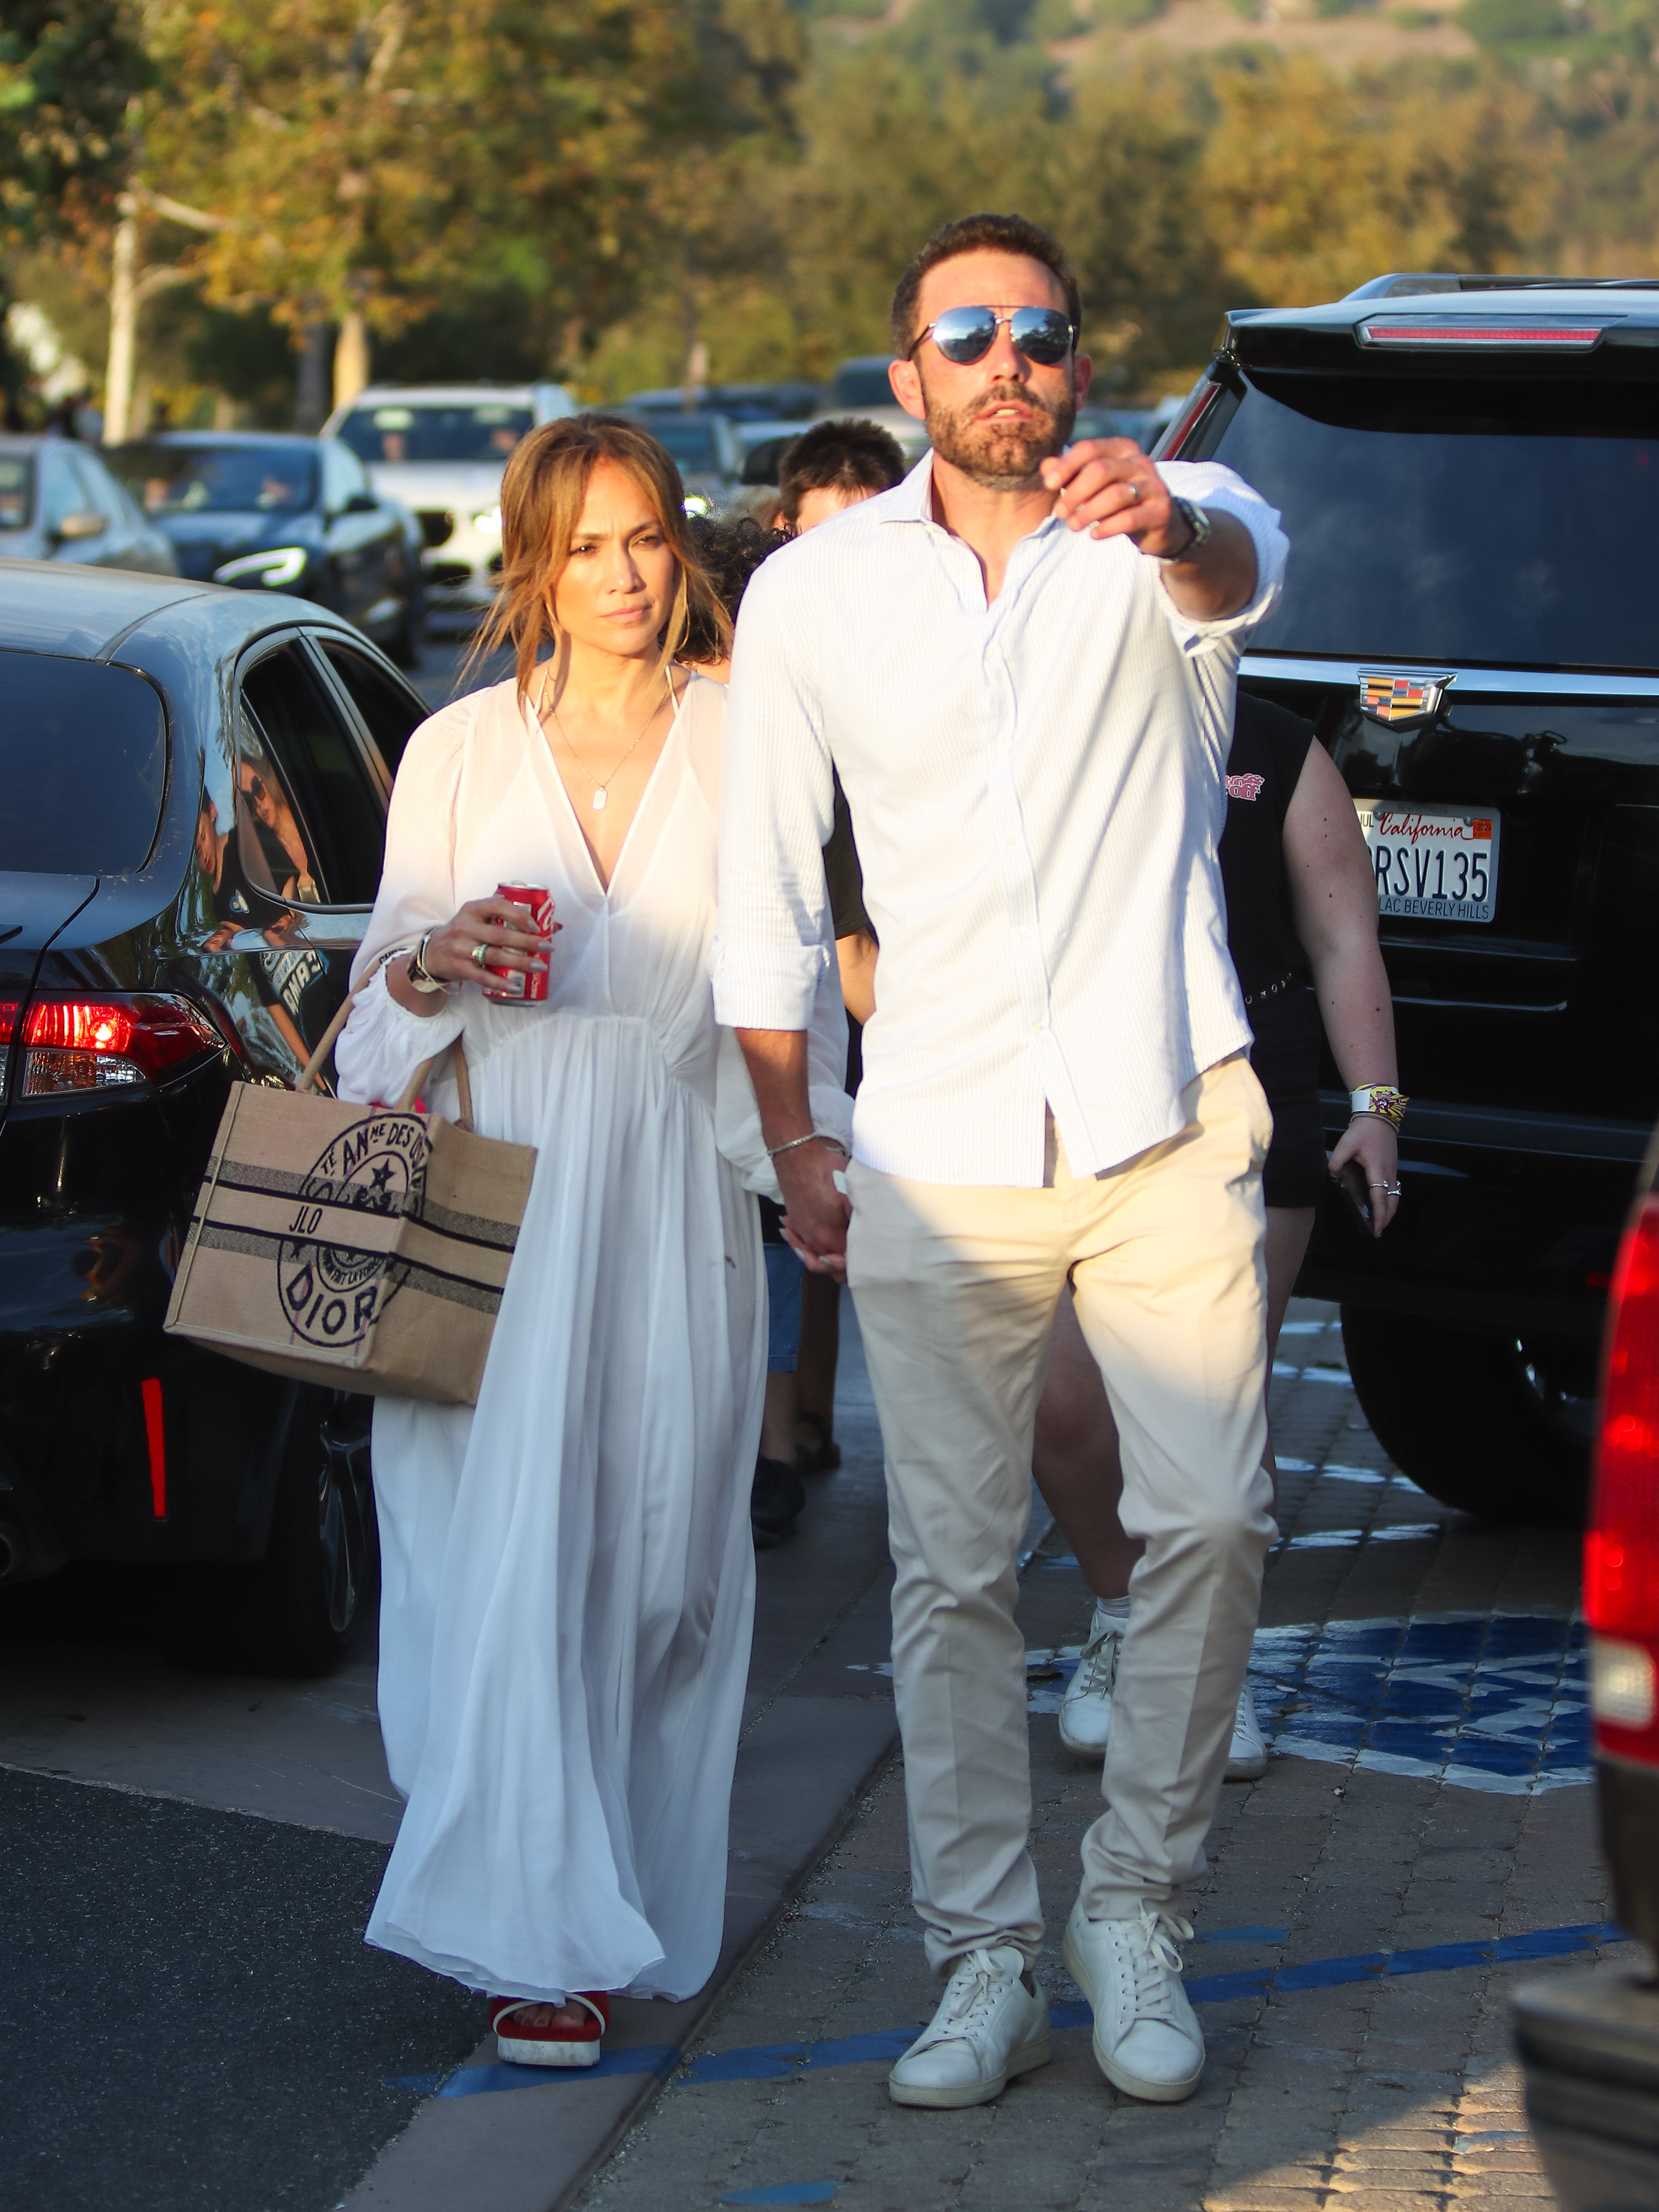 Jennifer Lopez and Ben Affleck spotted in Los Angeles, California on September 4, 2022 | Source: Getty Images